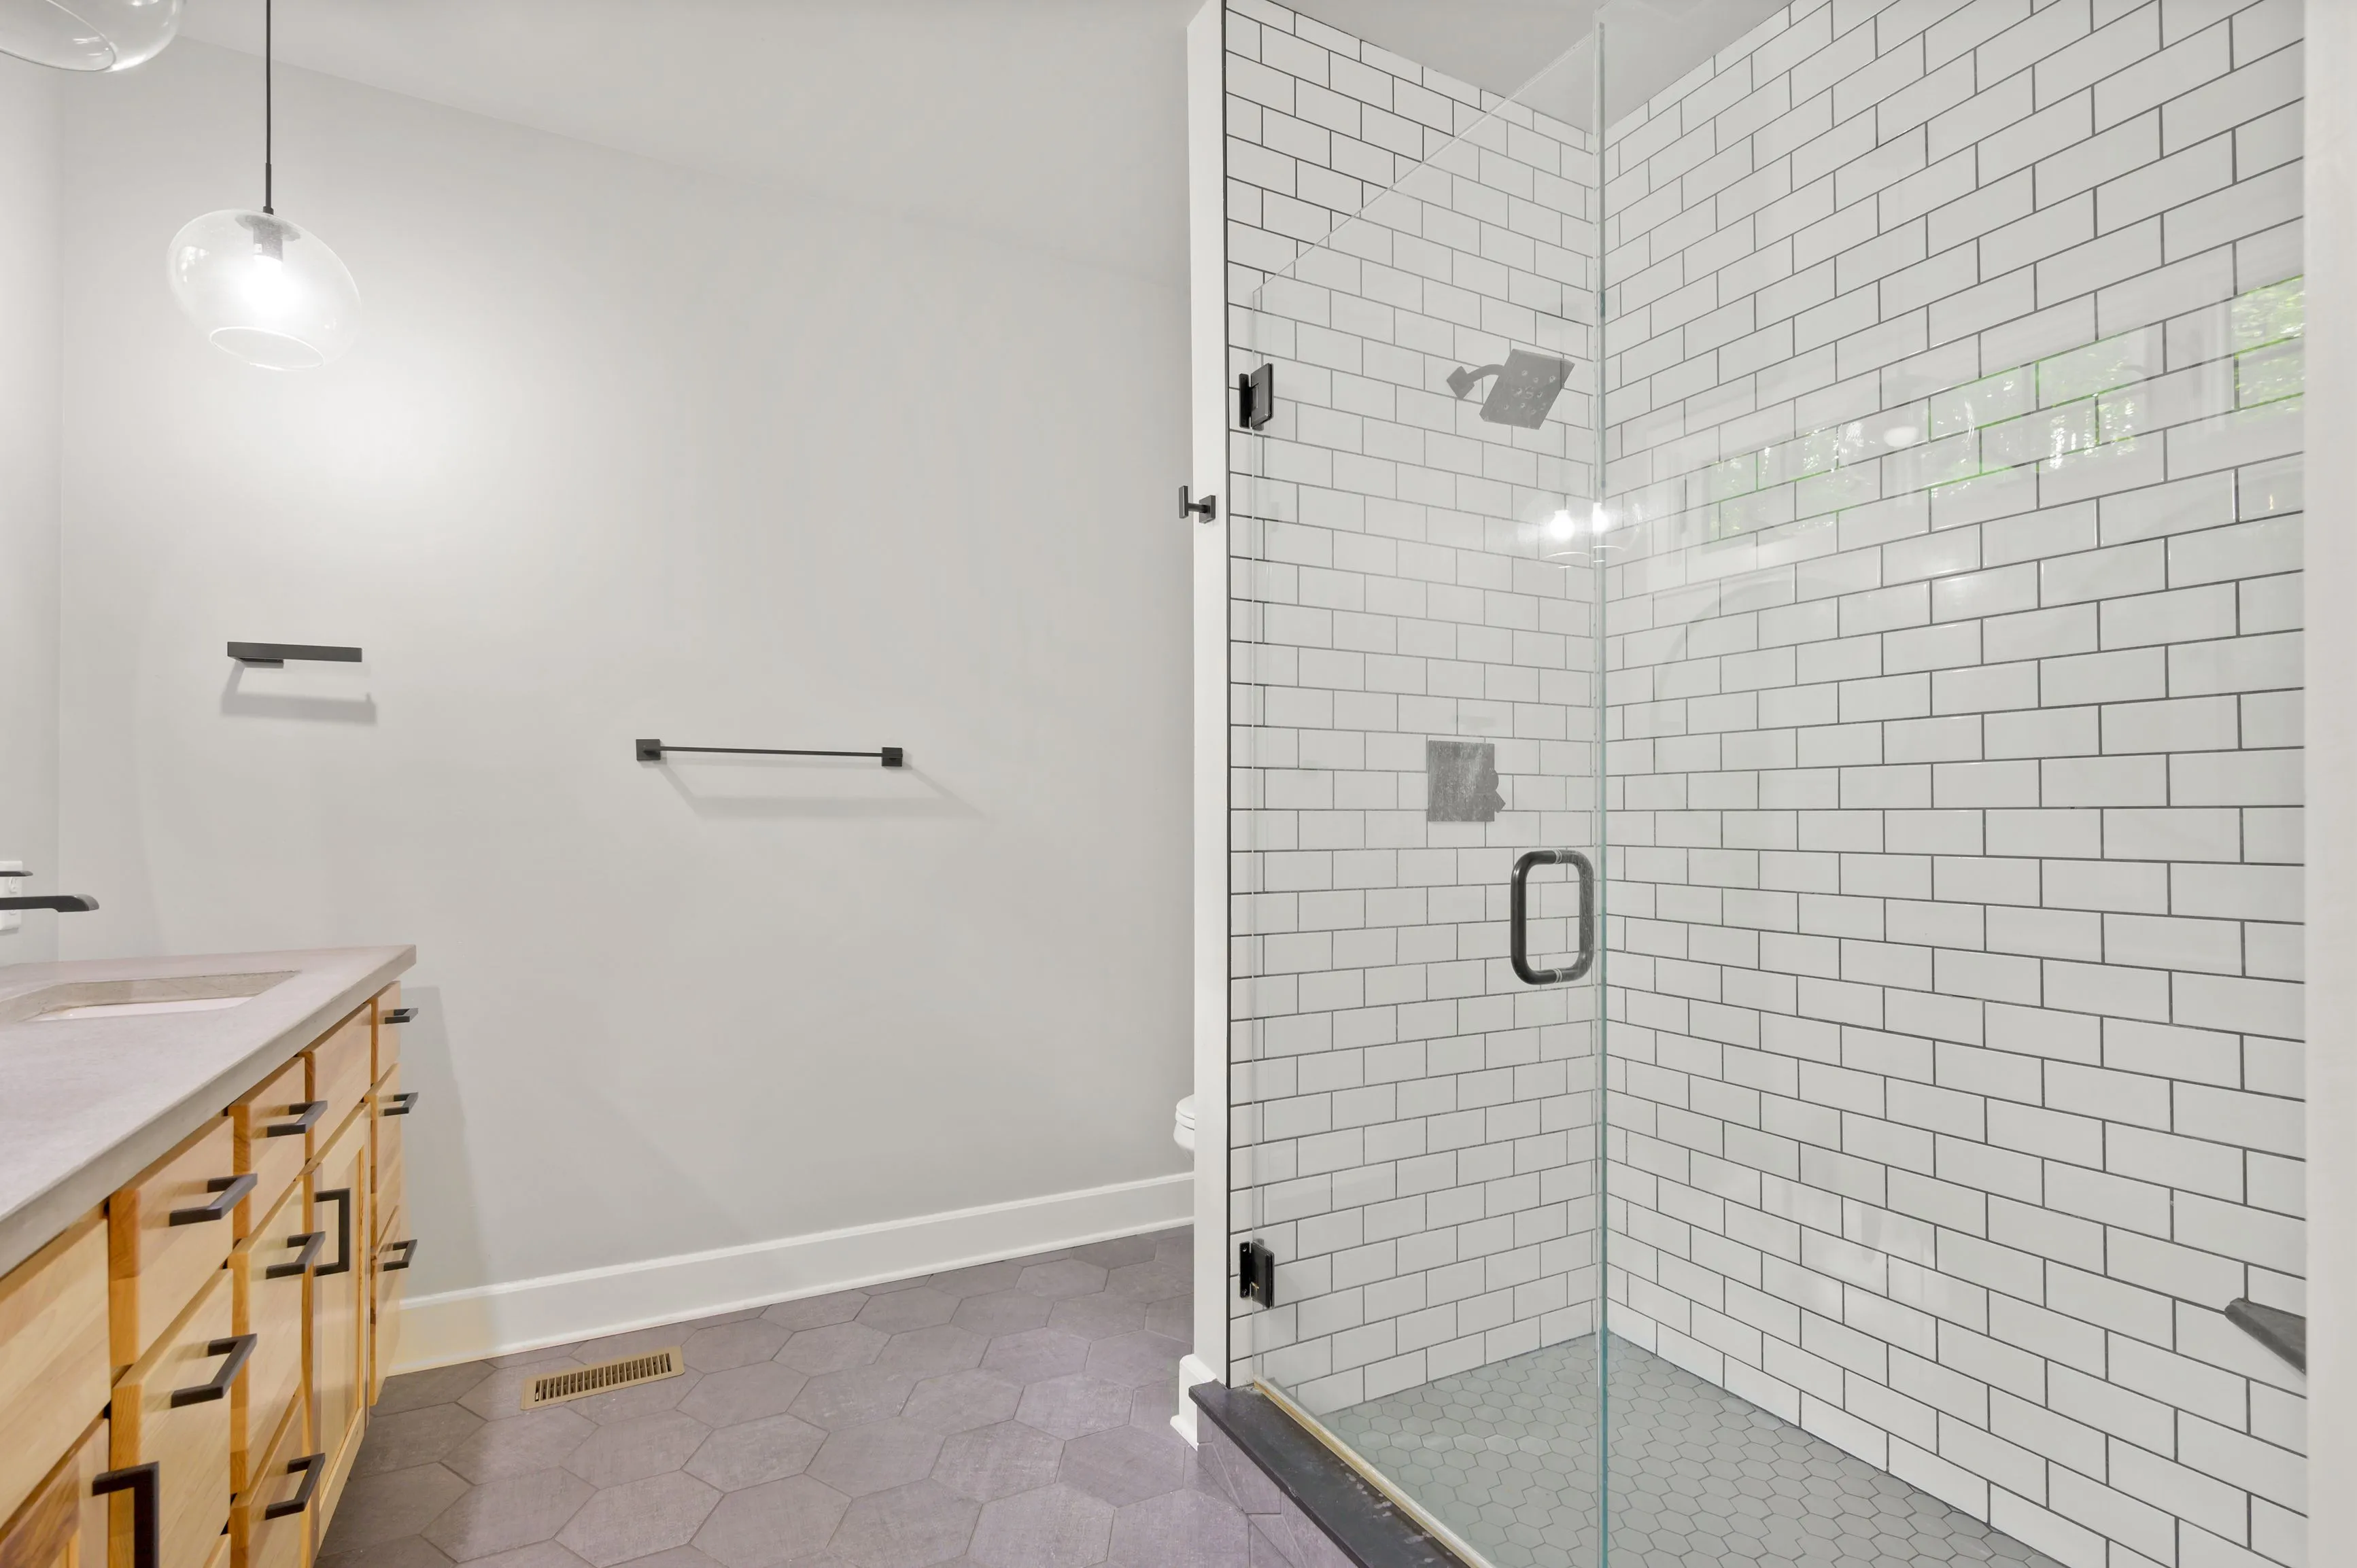 Modern bathroom interior with glass-enclosed shower, white subway tiles, and wooden vanity.